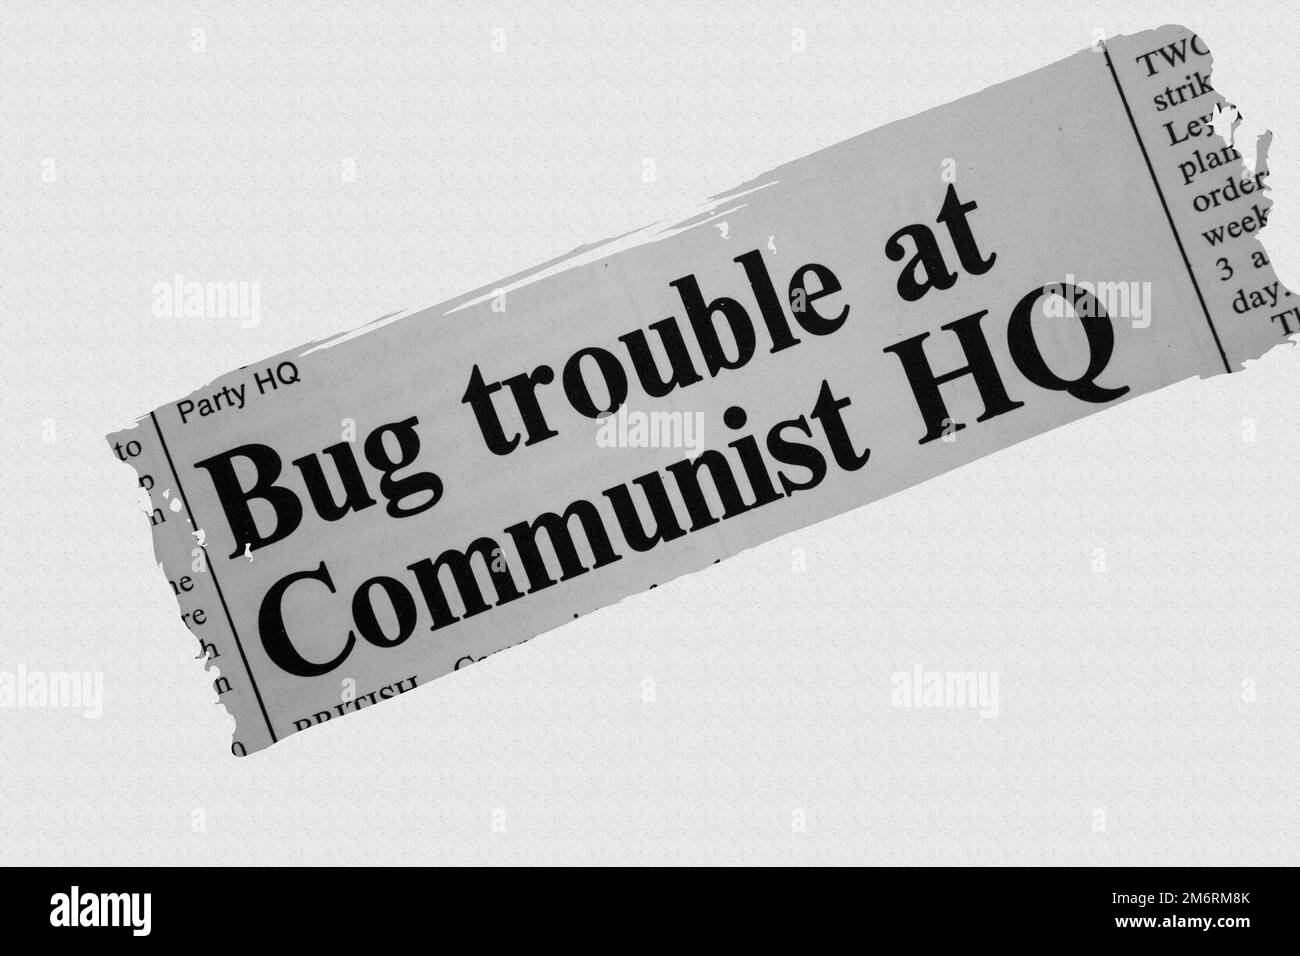 Bug trouble at Communist HQ - news story from 1975 newspaper headline article title - overlay Stock Photo